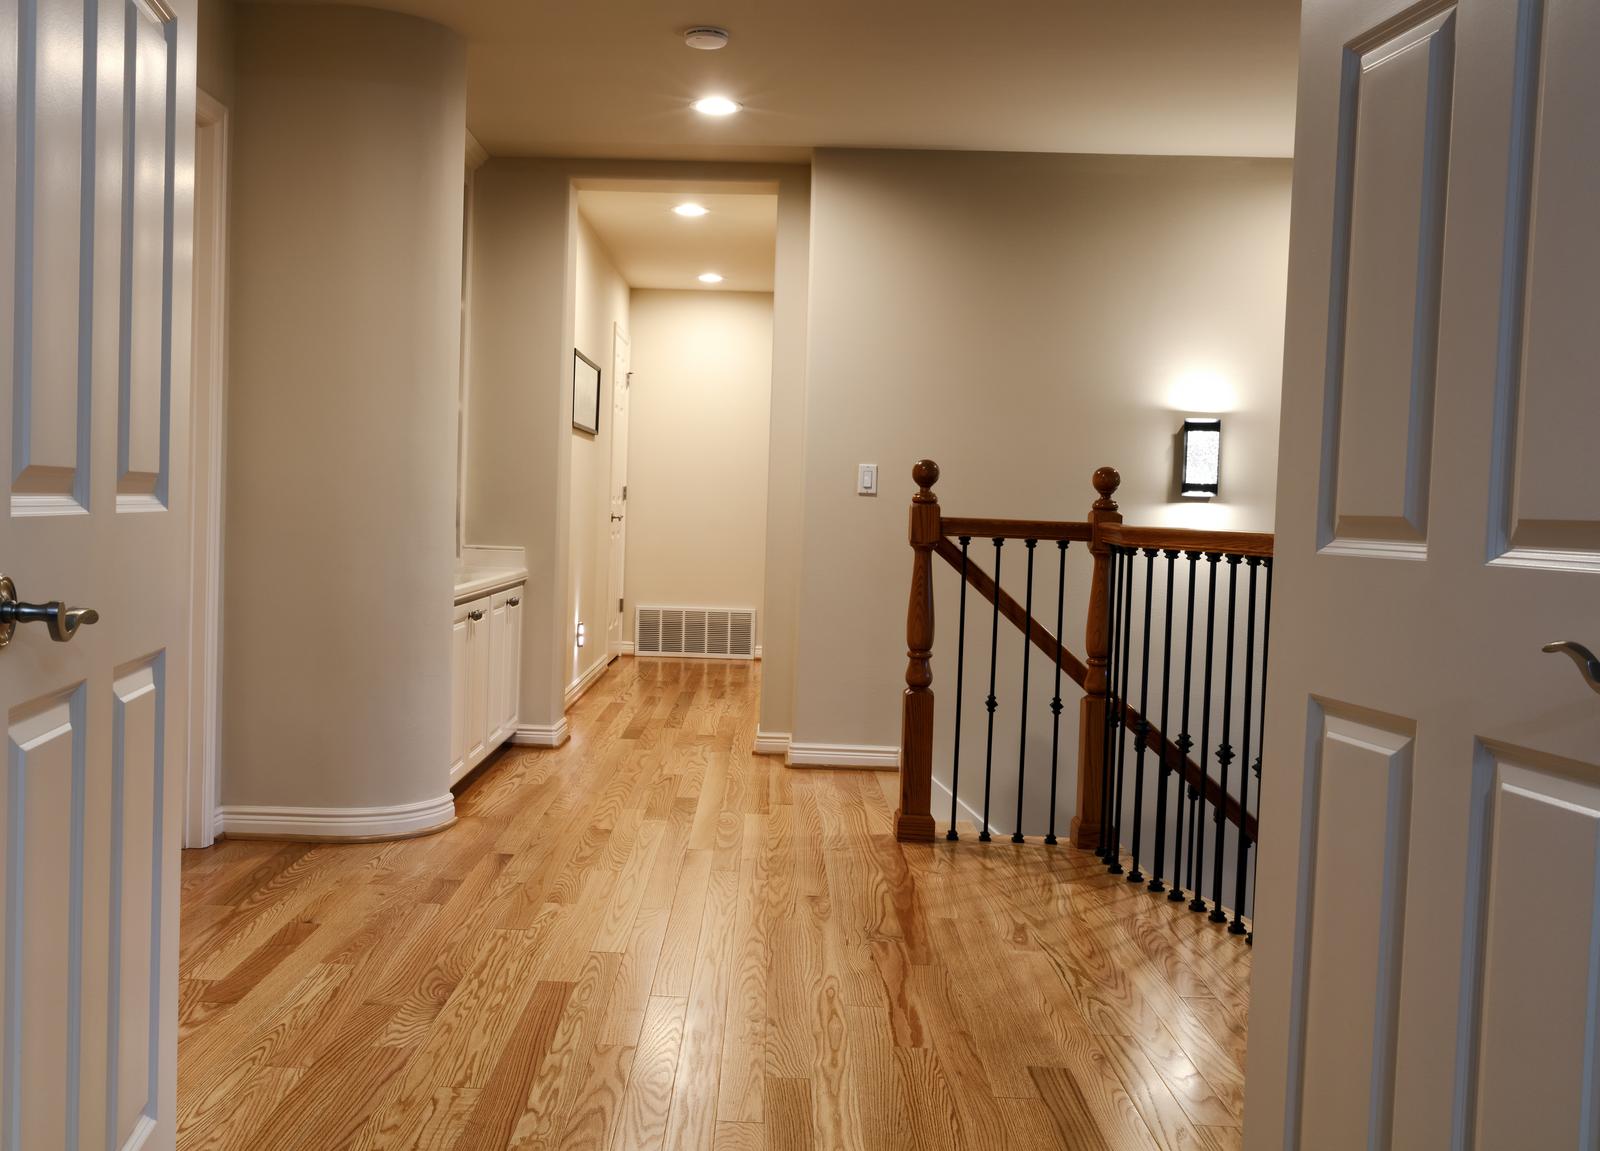 What Do You Need to Know before Buying Hardwood Floors?